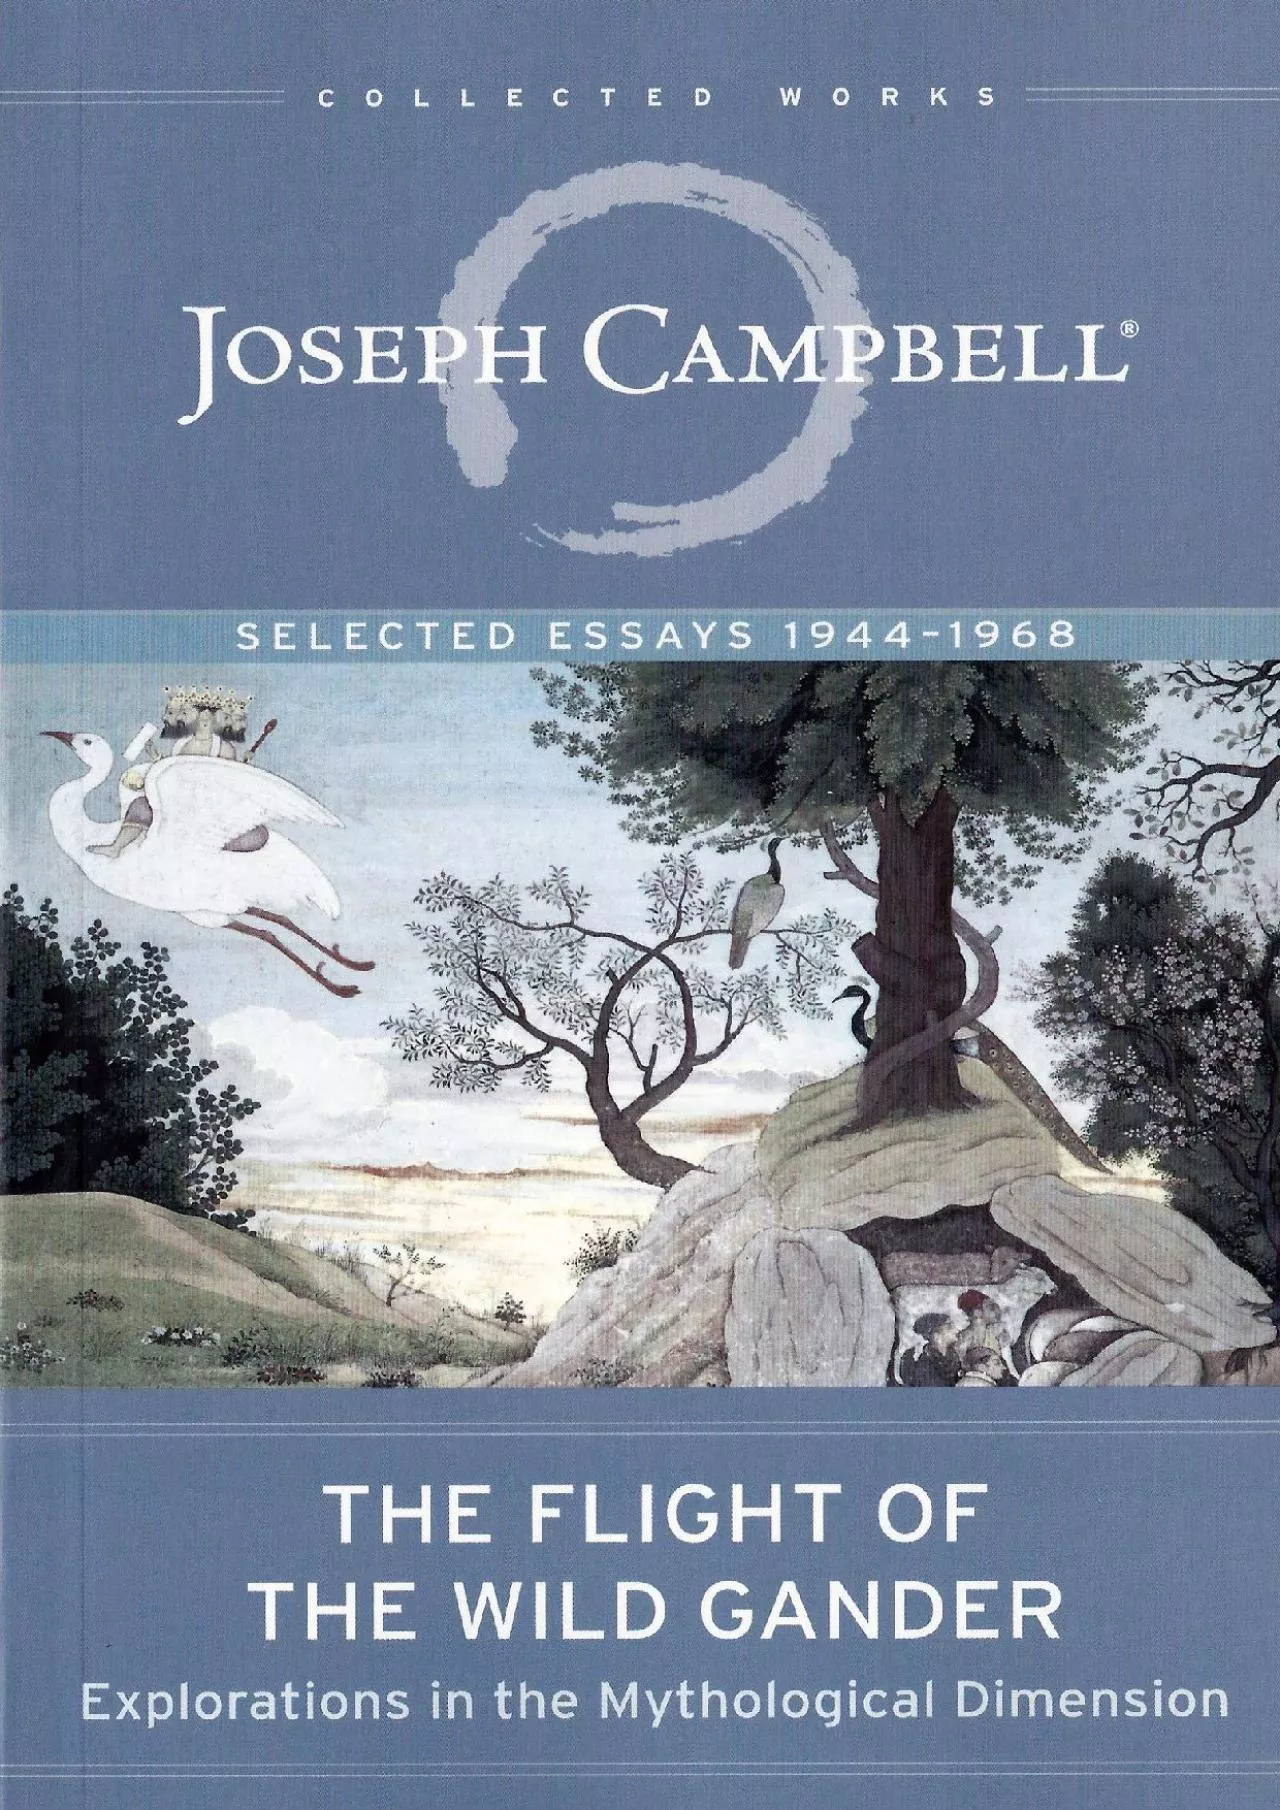 (DOWNLOAD)-The Flight of the Wild Gander: Explorations in the Mythological Dimension (The